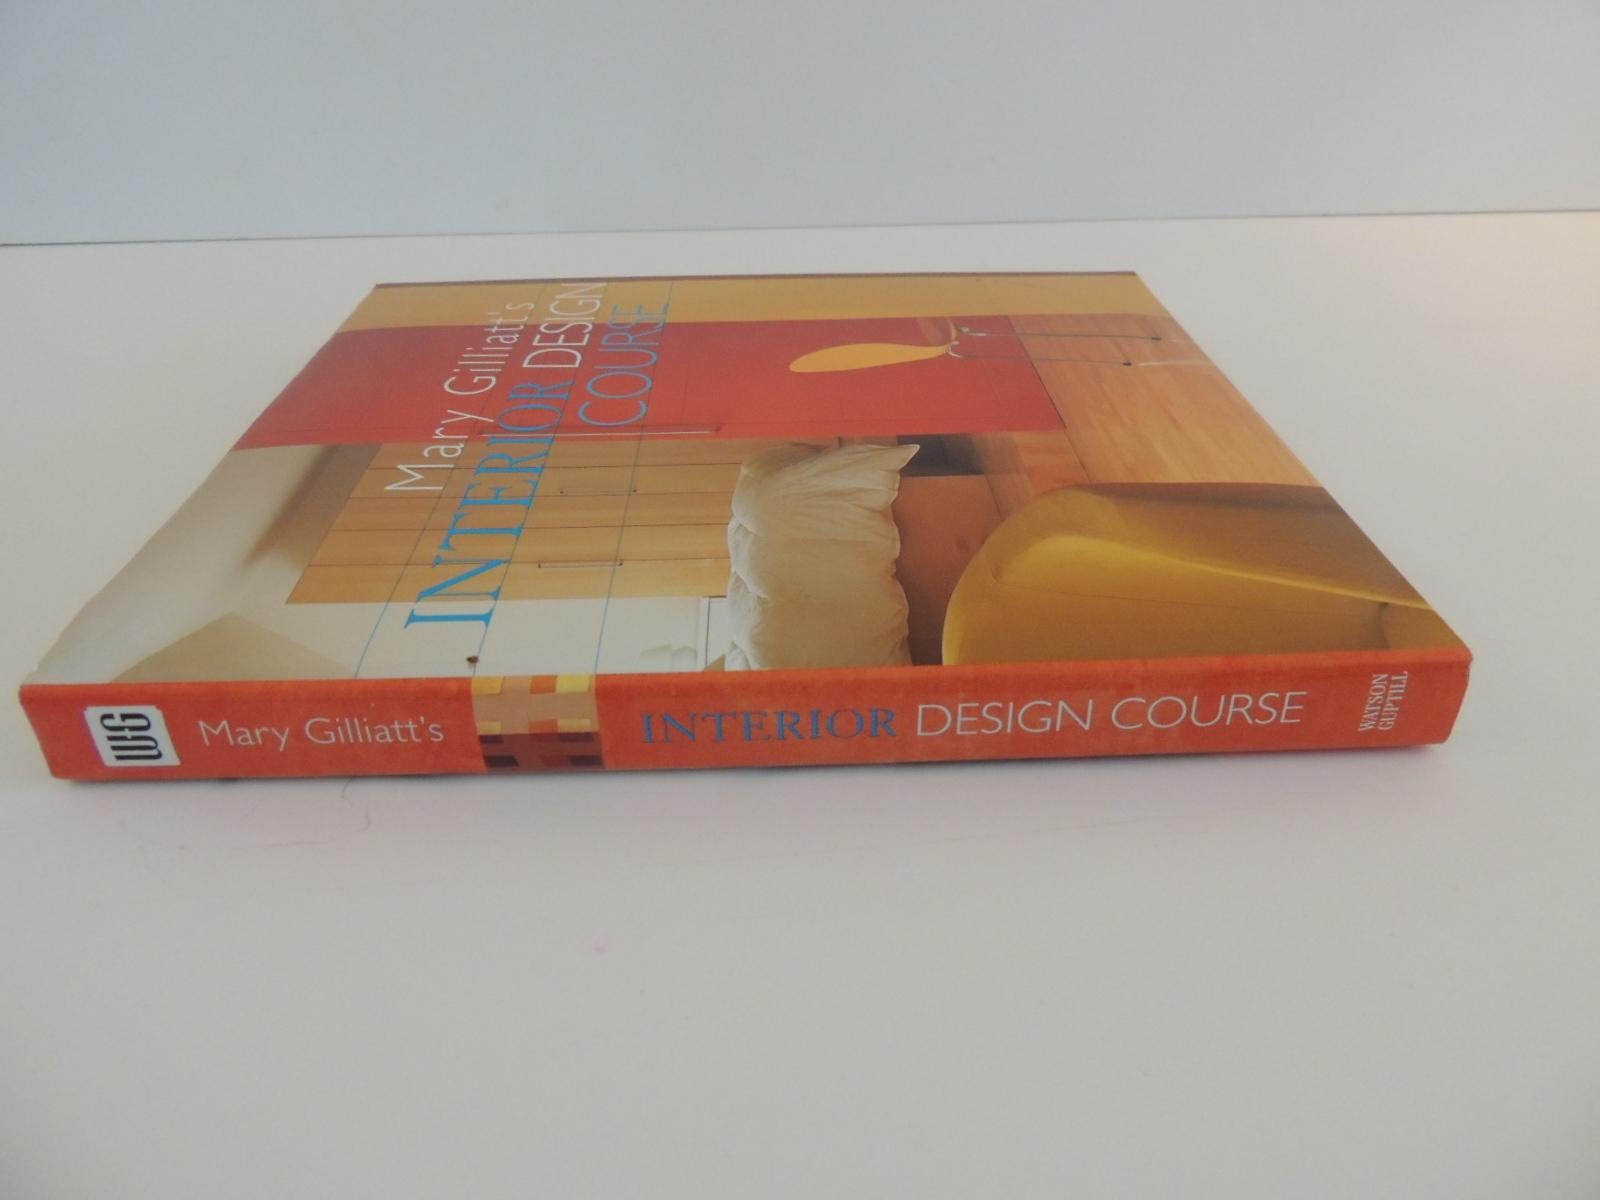 Structured as a complete course in interior design, internationally acclaimed interior designer Mary Gilliatt explains the principles of successful design through a series of easy-to-follow sections. The book is divided into 2 main sections - The